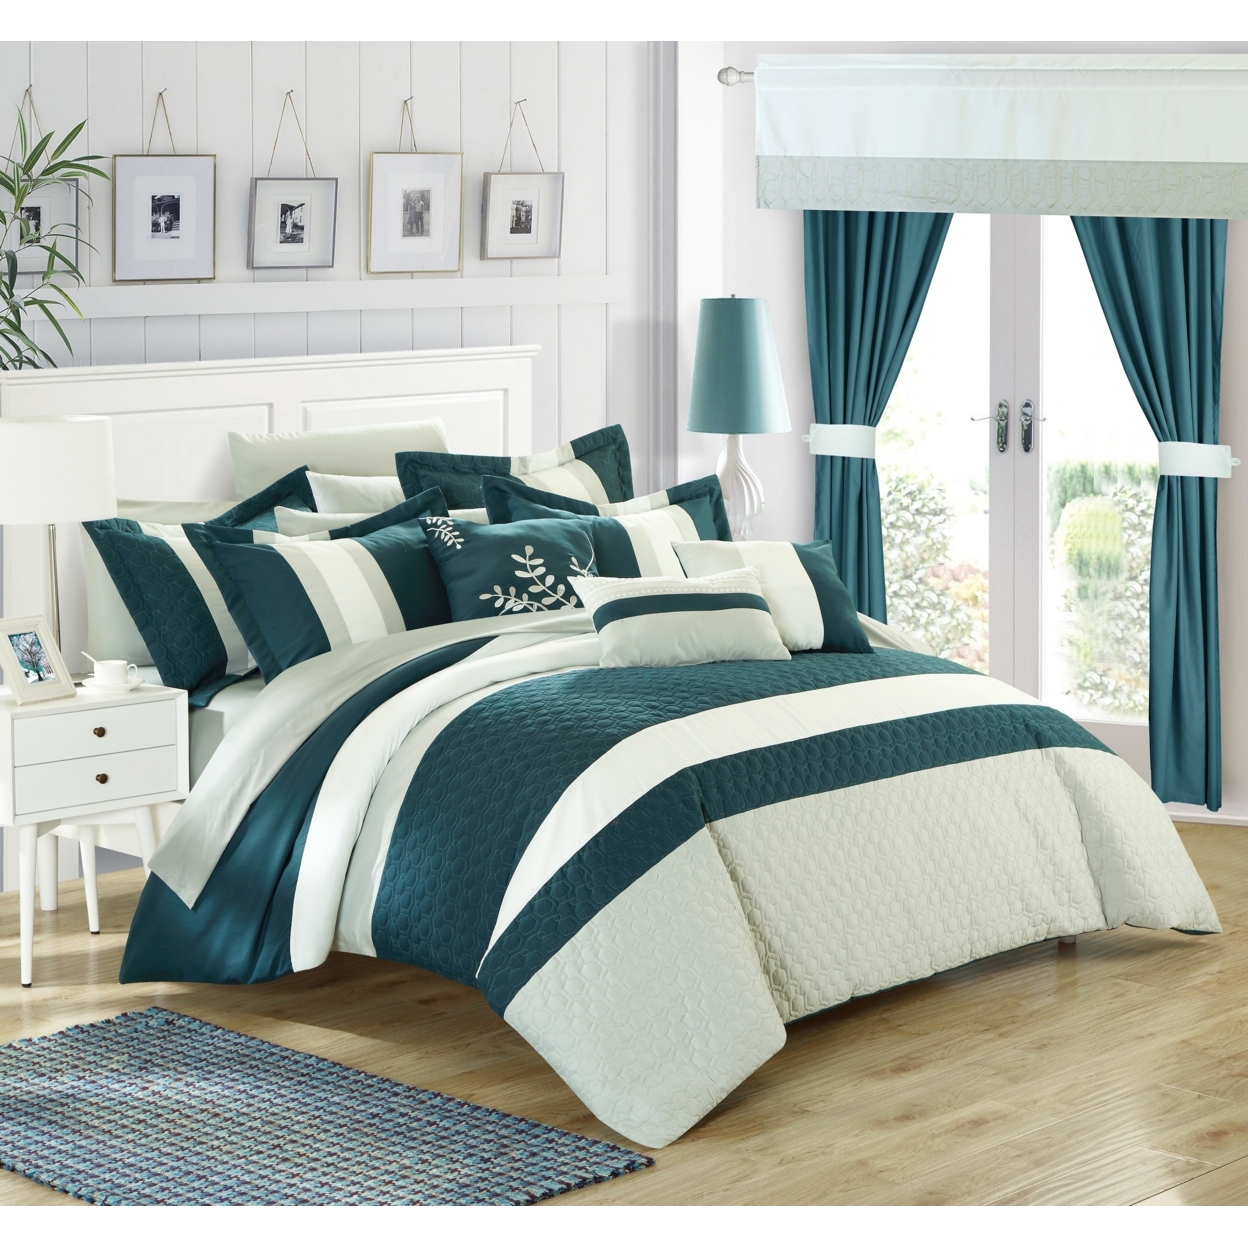 Chic Home 24 Piece Placido Complete Bedroom Set With Octagon Embroidery Color Block Pattern - Teal, King